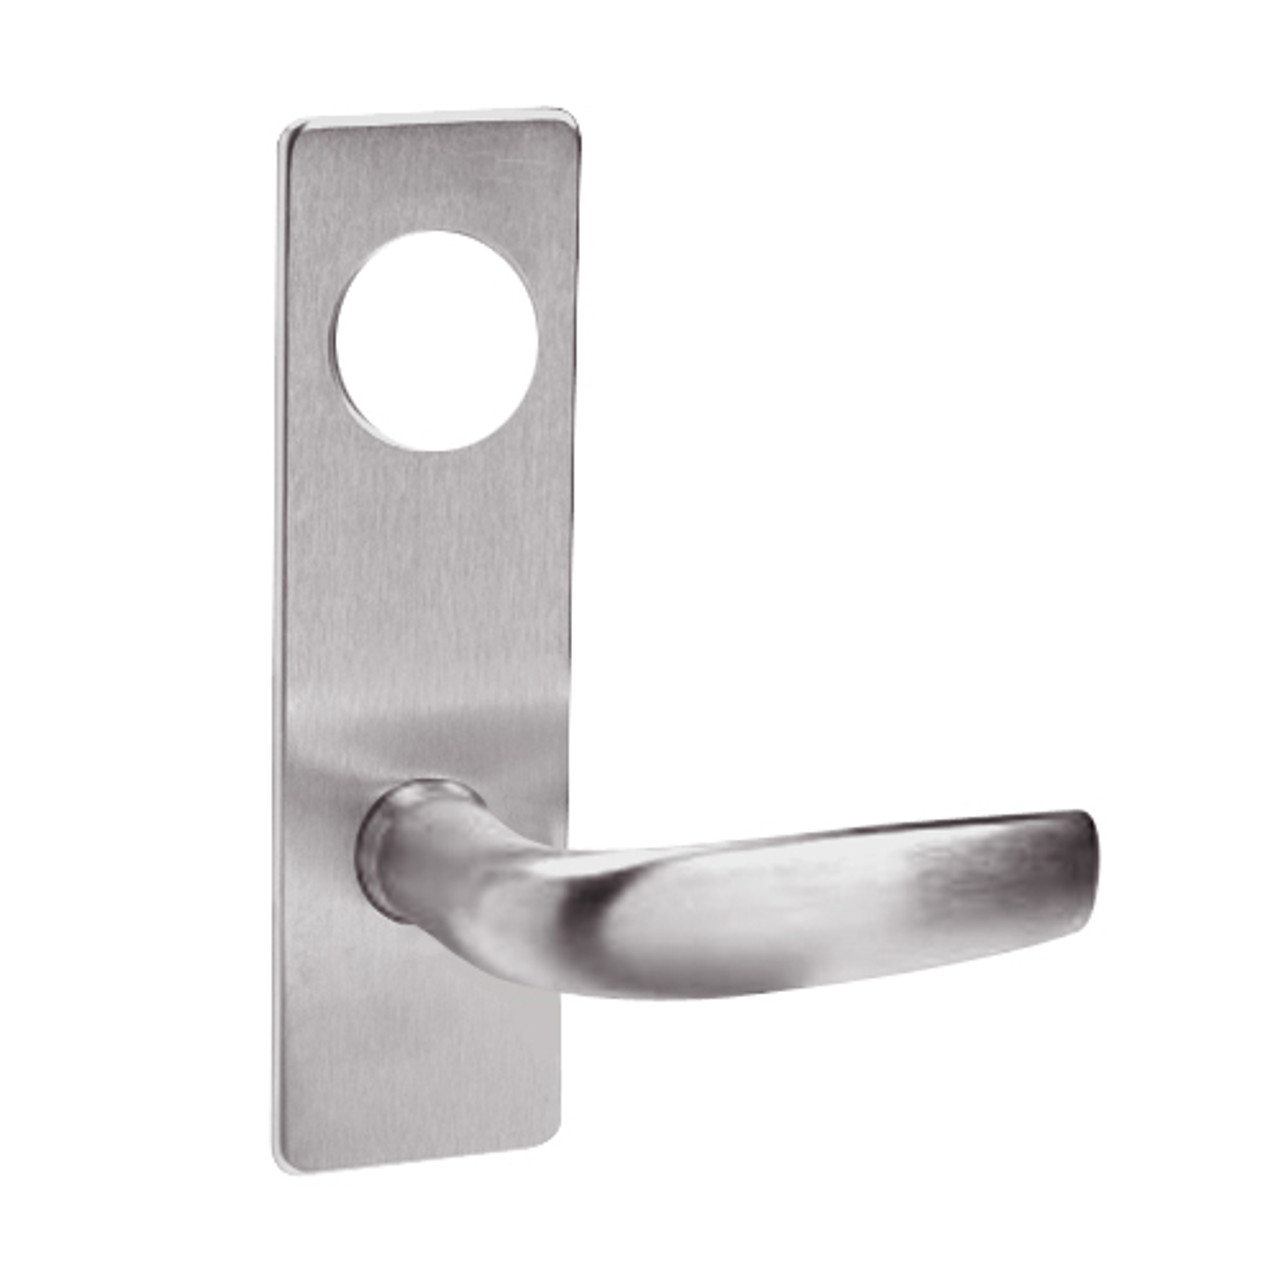 ML2069-CSM-630-CL7 Corbin Russwin ML2000 Series IC 7-Pin Less Core Mortise Institution Privacy Locksets with Citation Lever in Satin Stainless